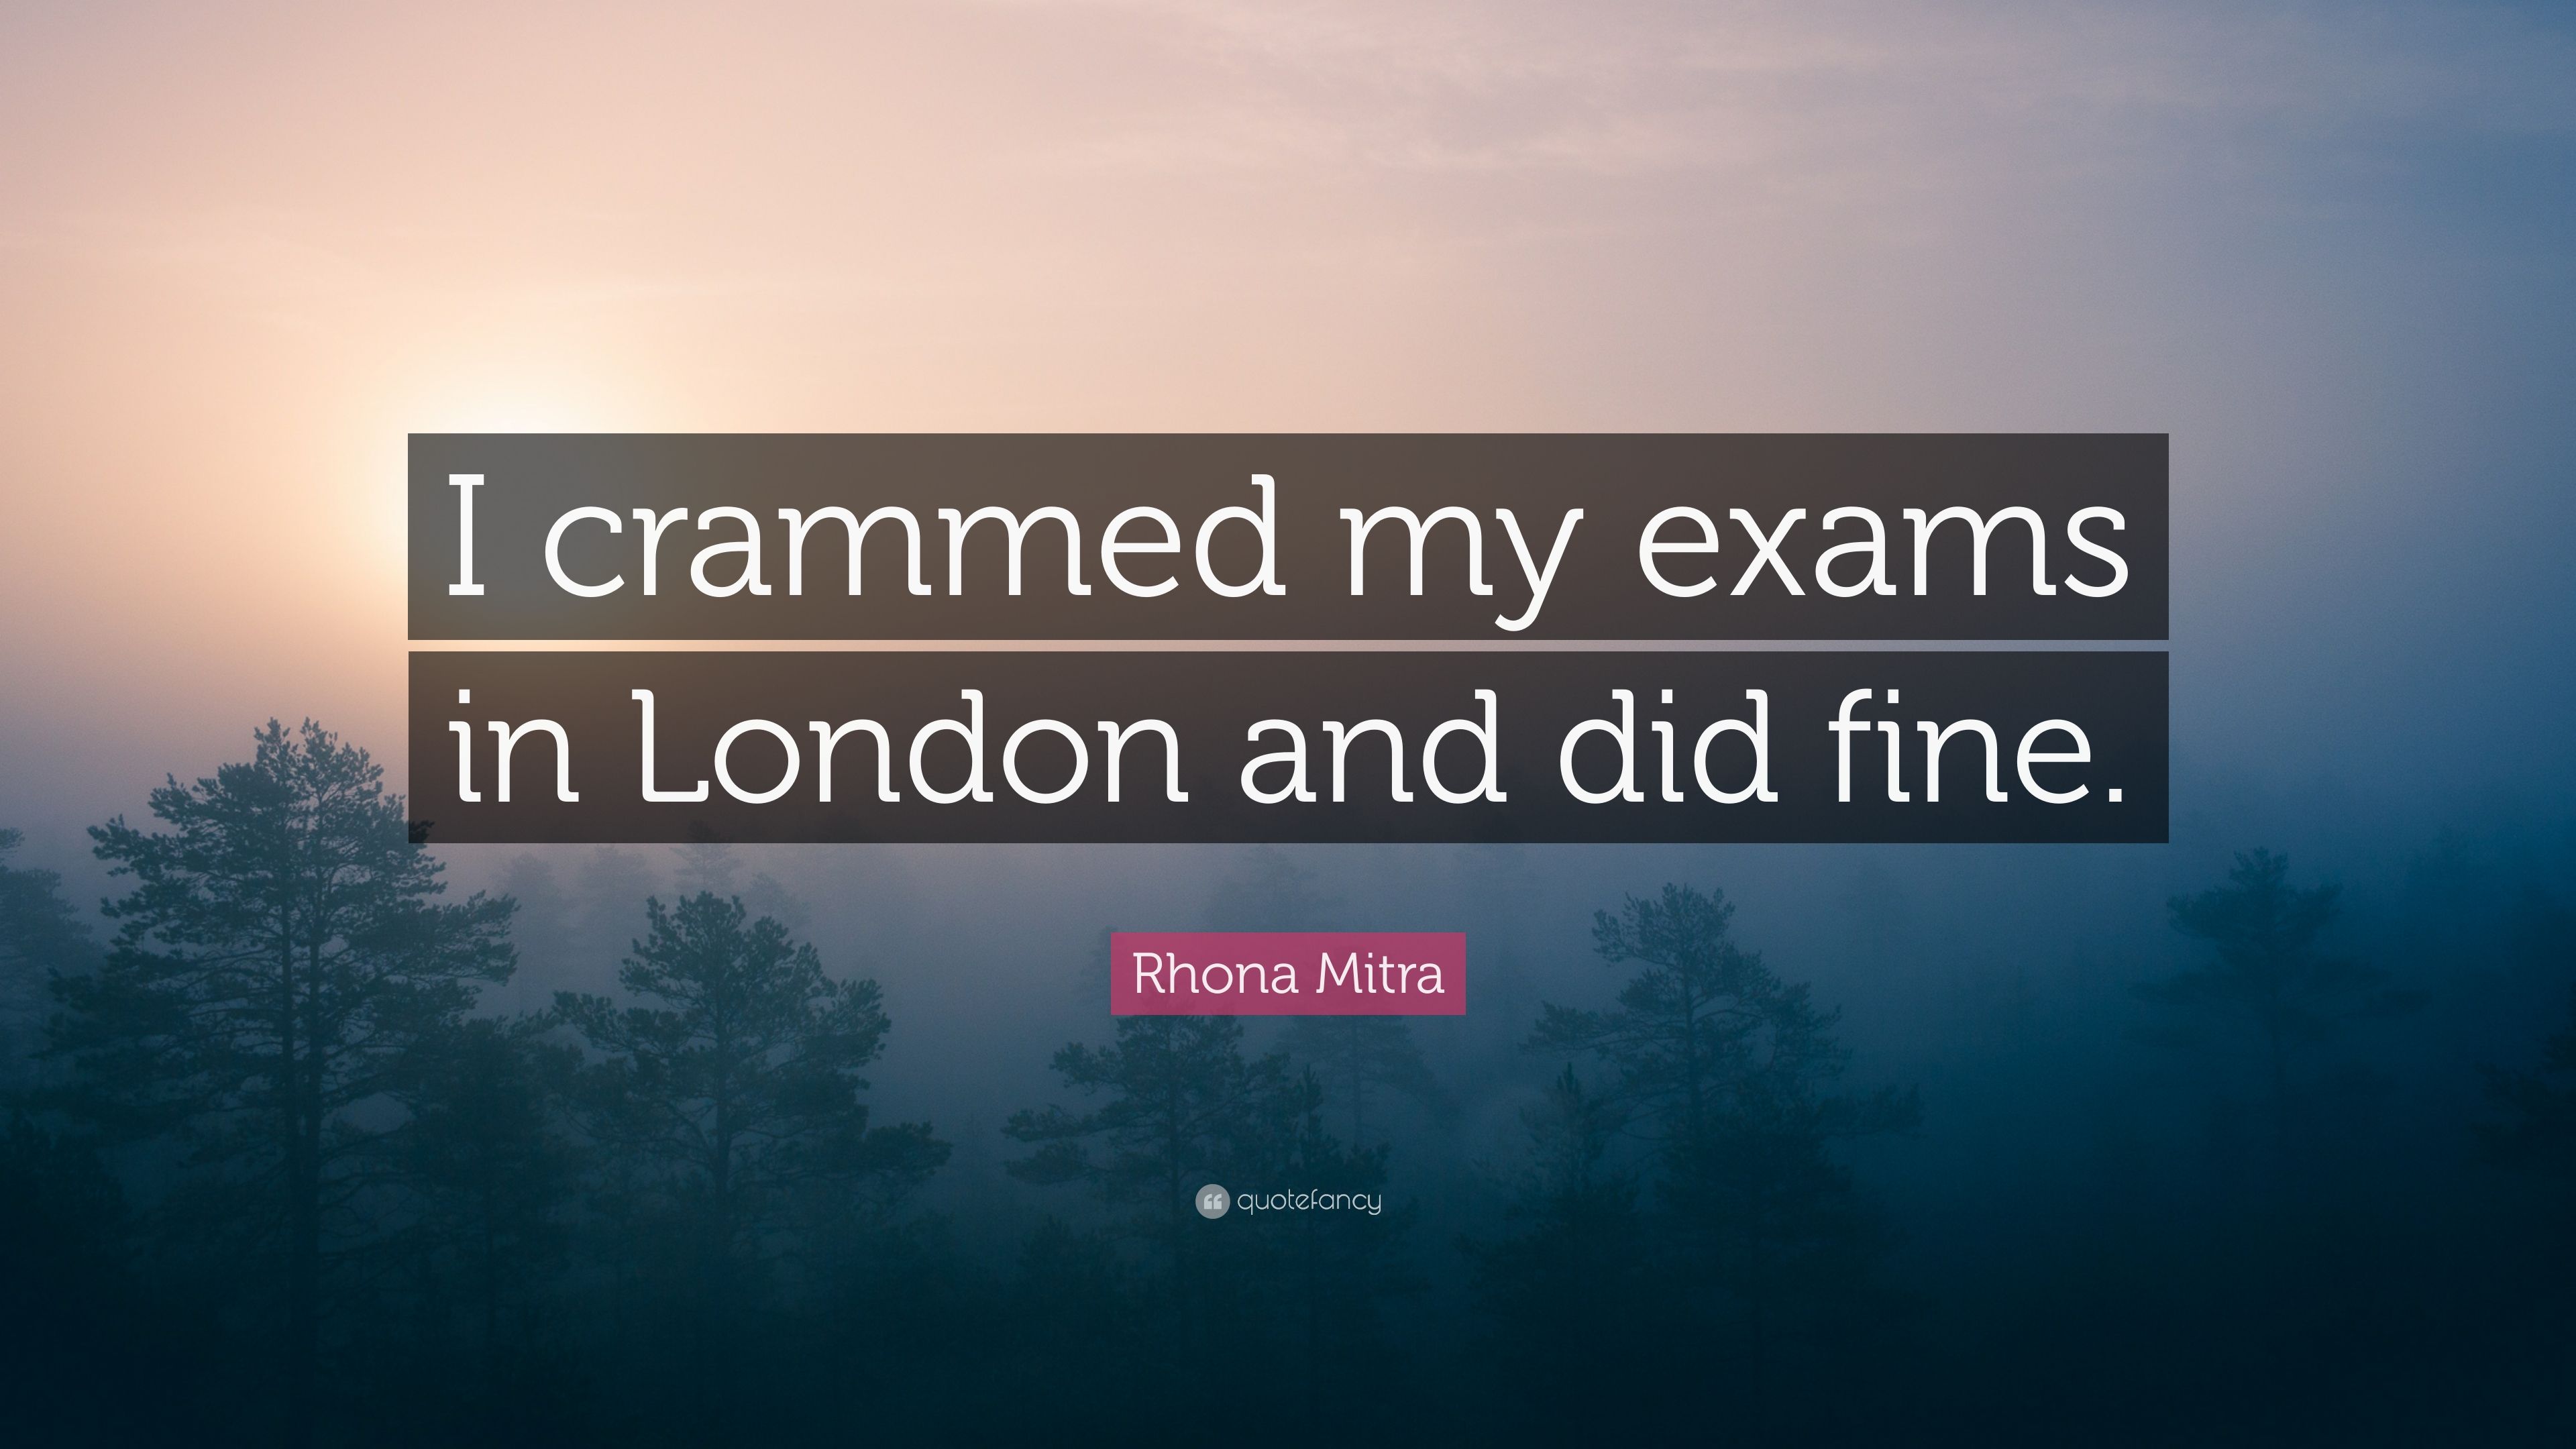 Rhona Mitra Quote: “I crammed my exams in London and did fine.” (7 wallpaper)